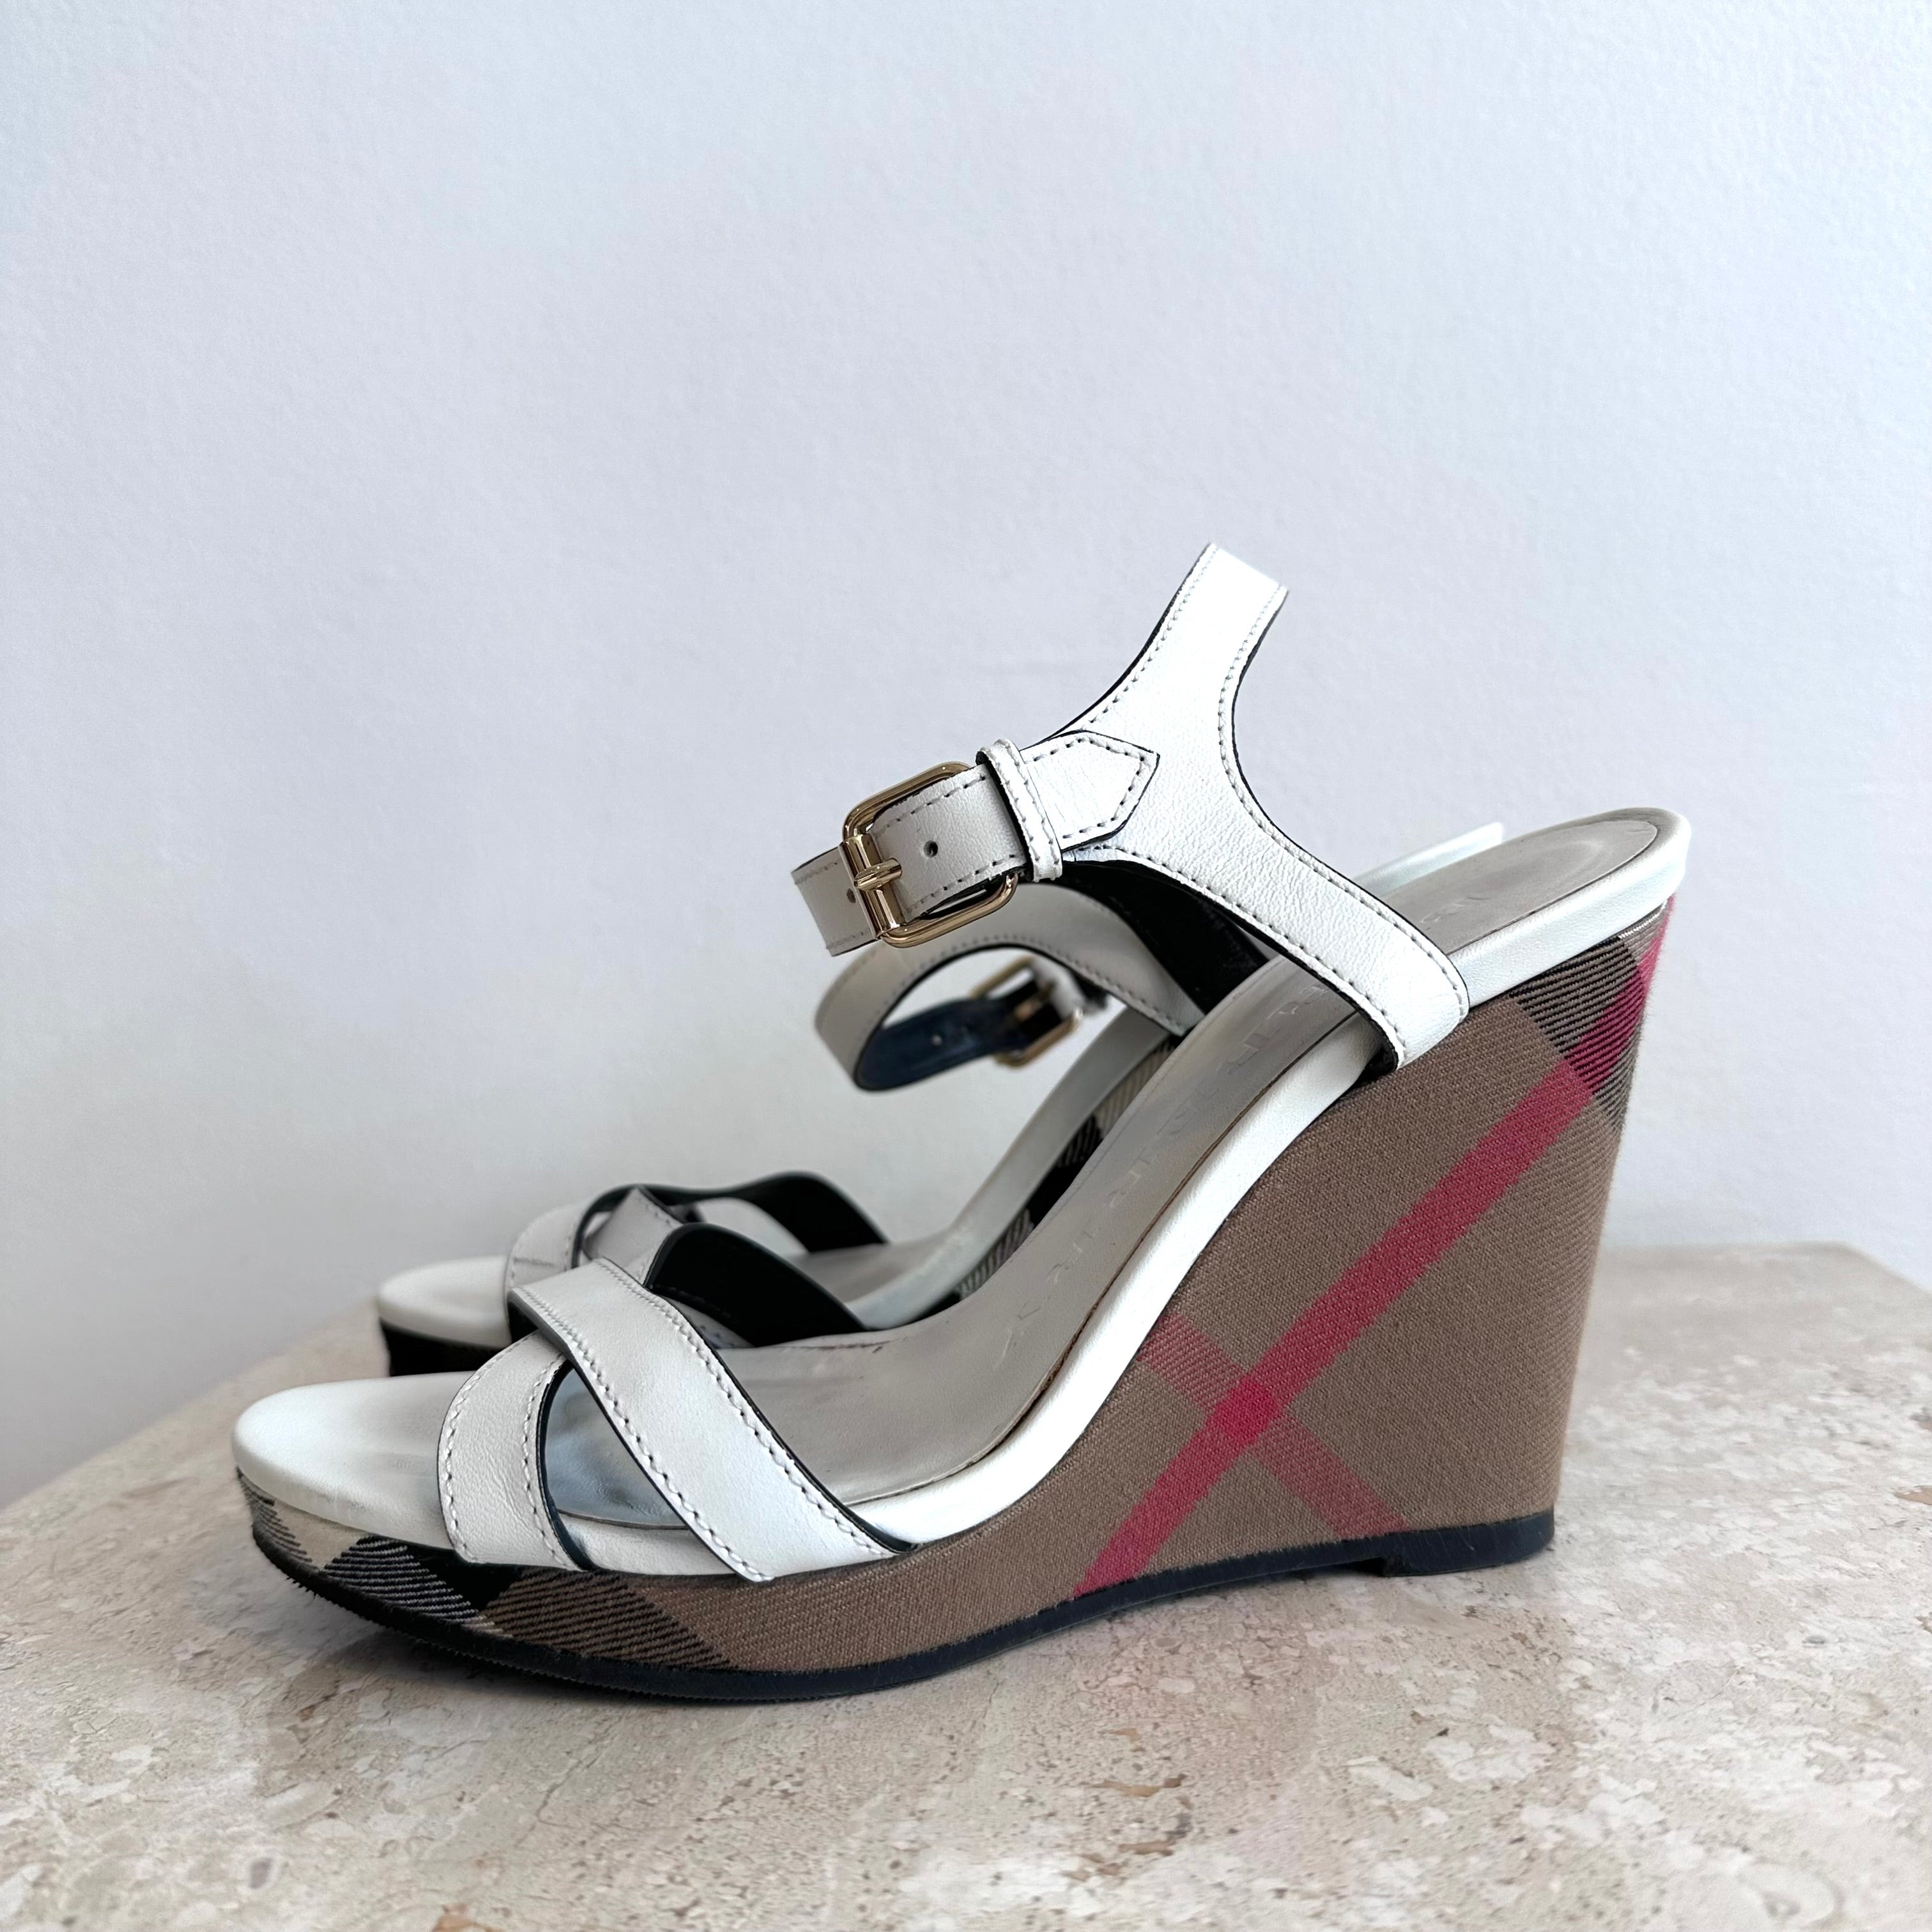 Pre-Owned BURBERRY Wedge Heel Size 36